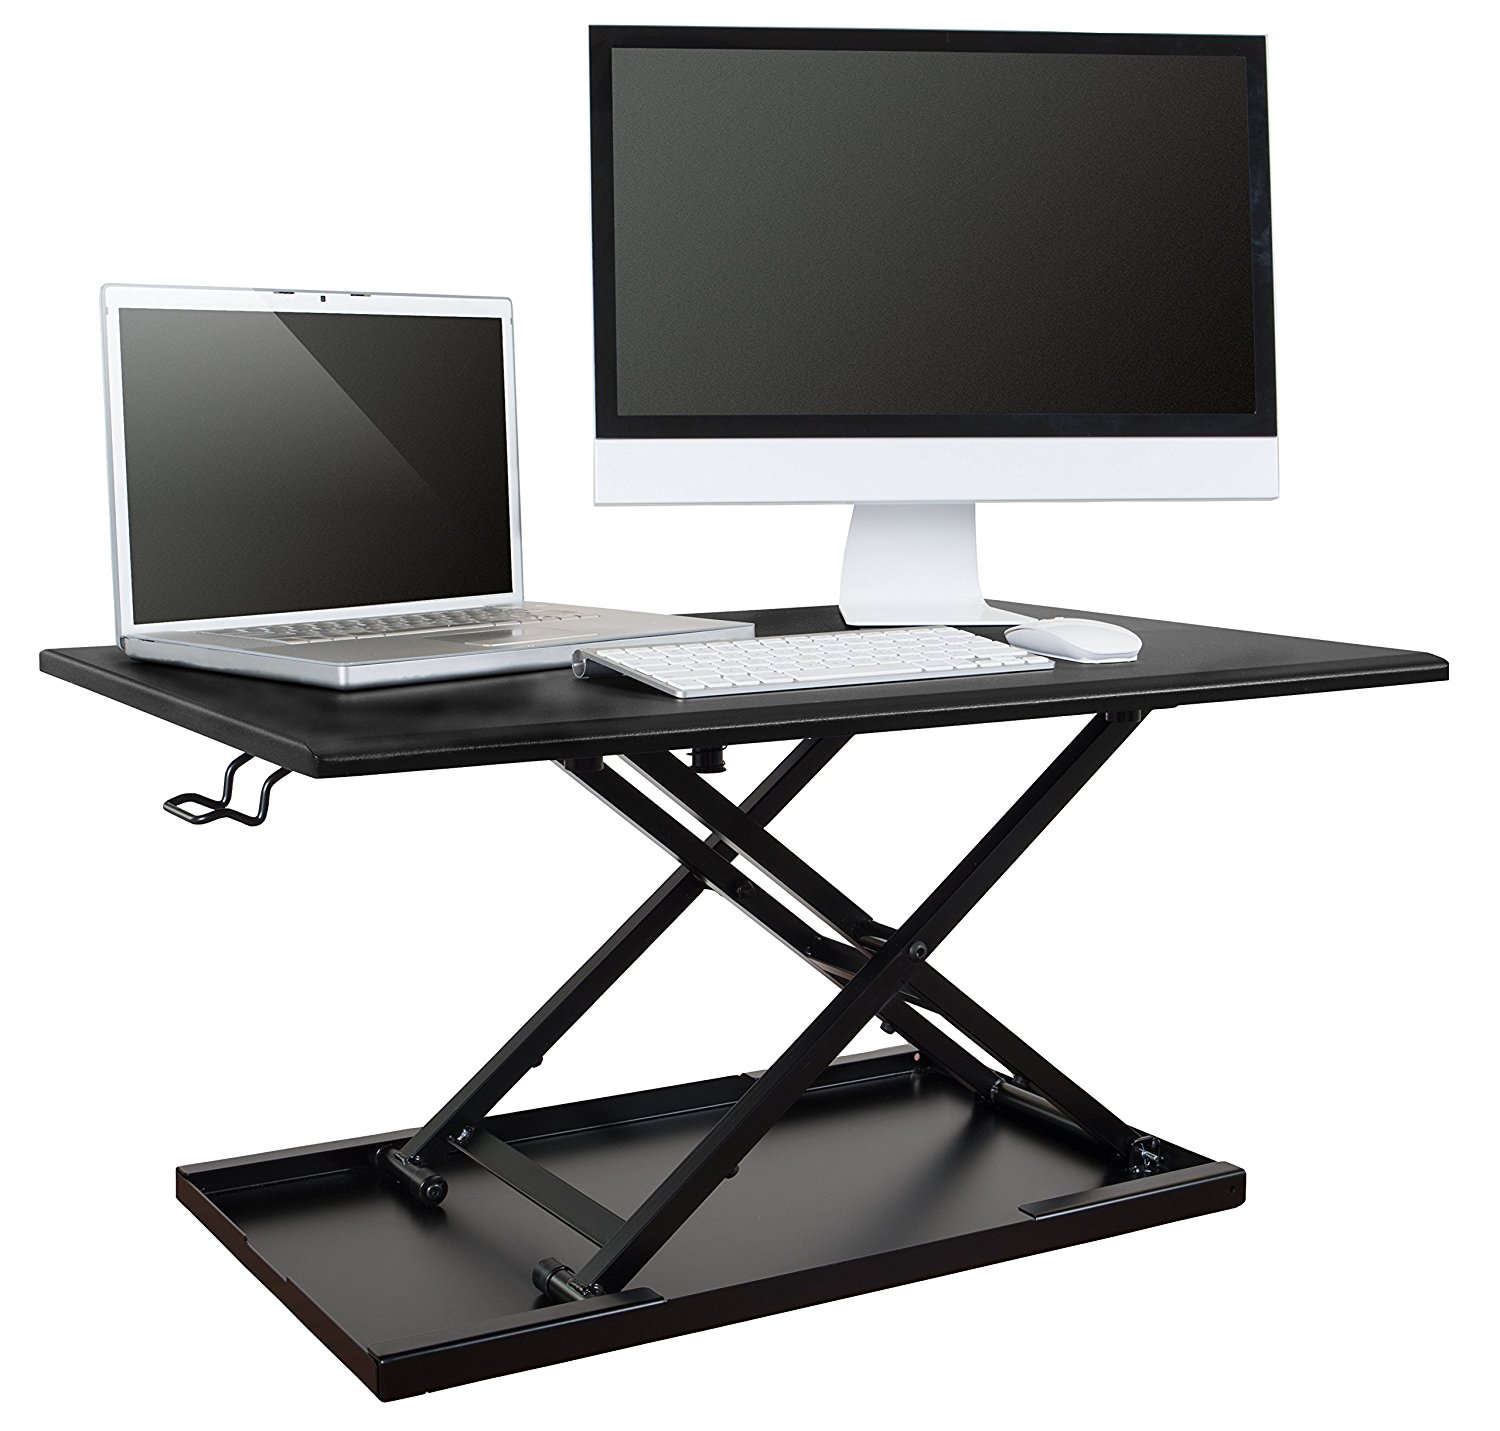 AirRise Pro Standing Desk Converter a Adjustable Height, Two Tier